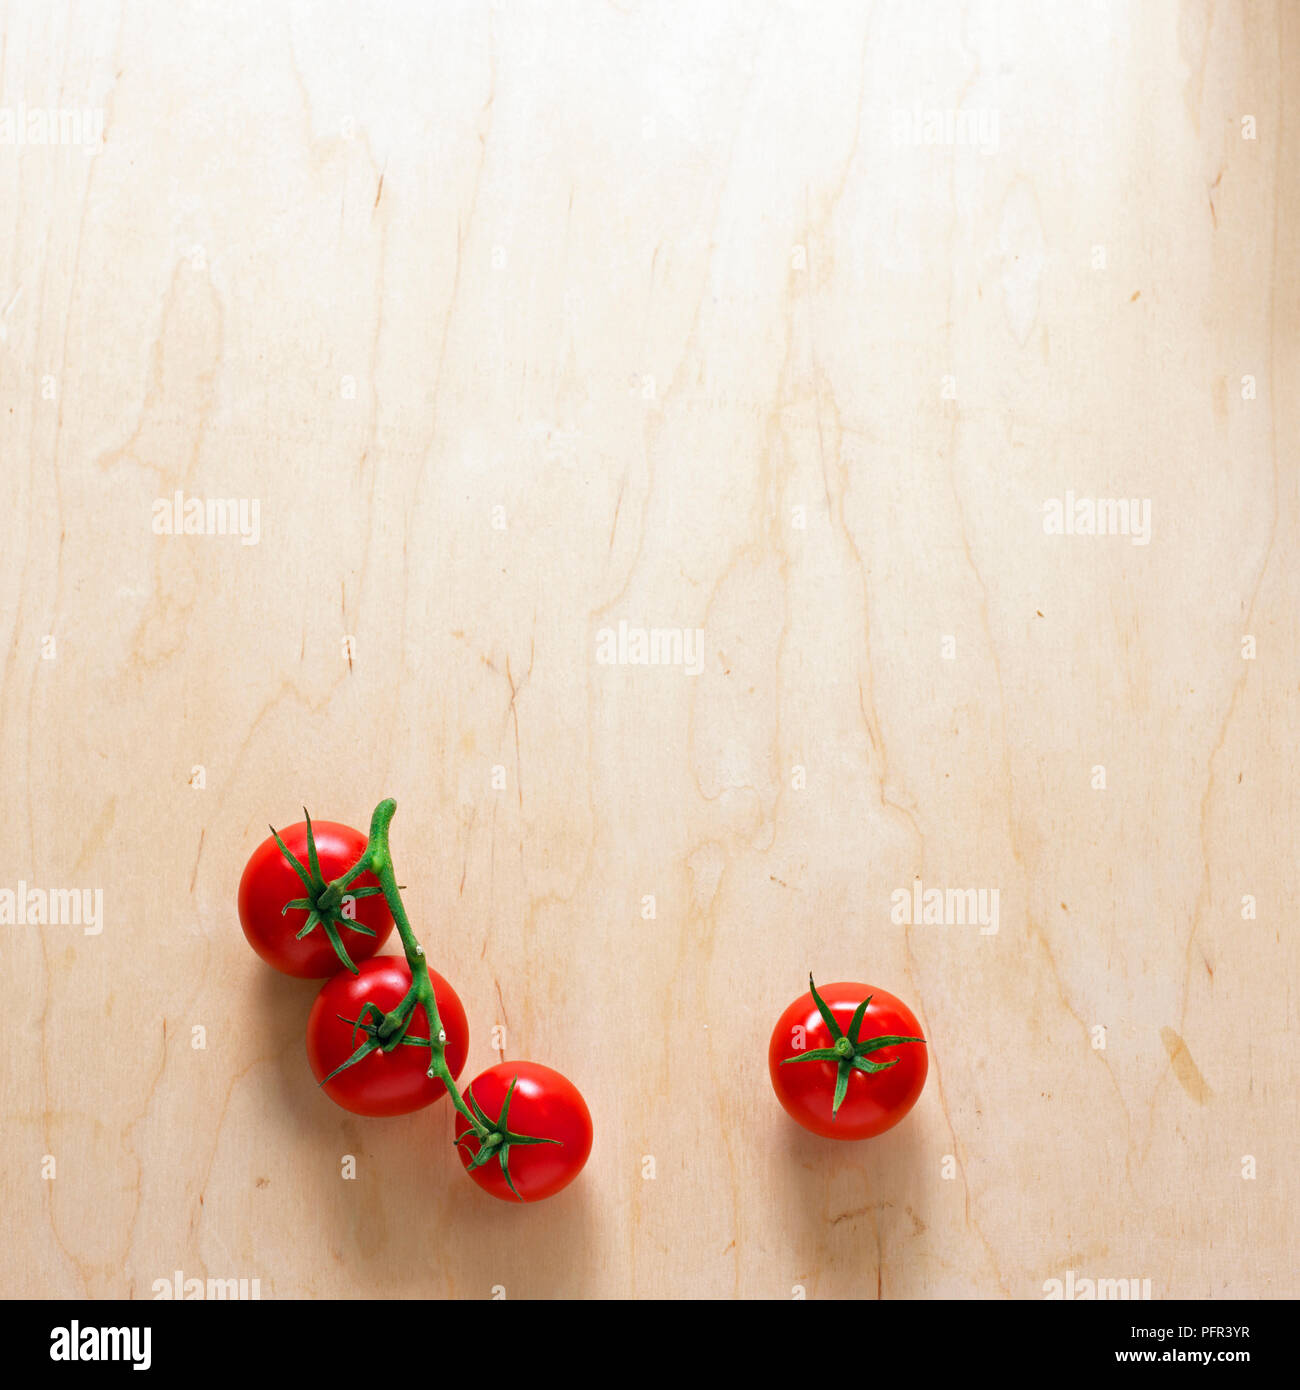 Vine tomatoes on wooden background Stock Photo